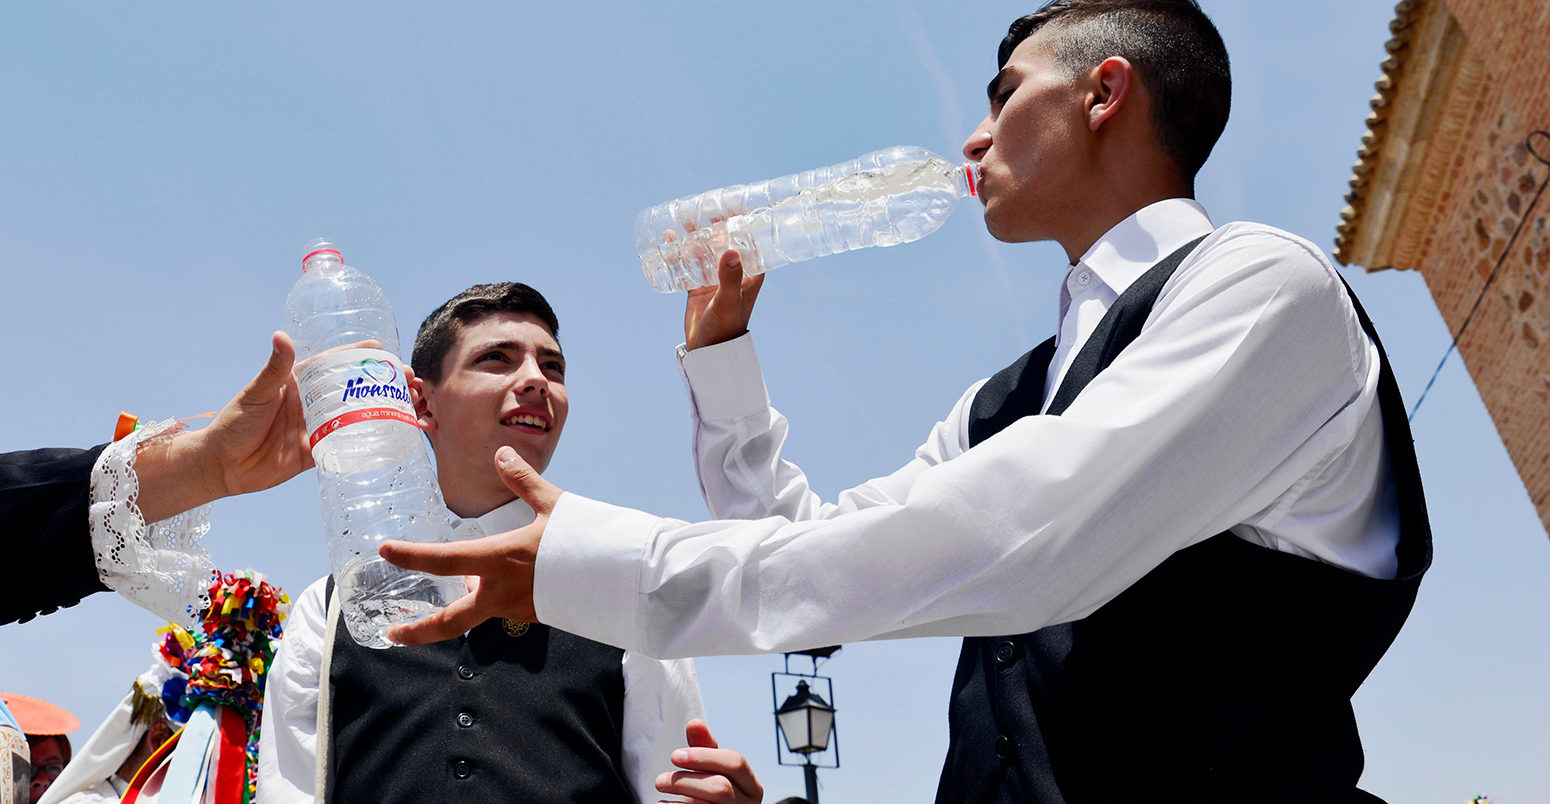 JCF7X8 Camunas, Toledo, Spain. 15th June, 2017. Young people drink water during the procession of the Corpus Christi. Part of Spain is experiencing a heatwave with temperatures up to 42C degrees. Credit: M.Ramirez/Alamy Live News